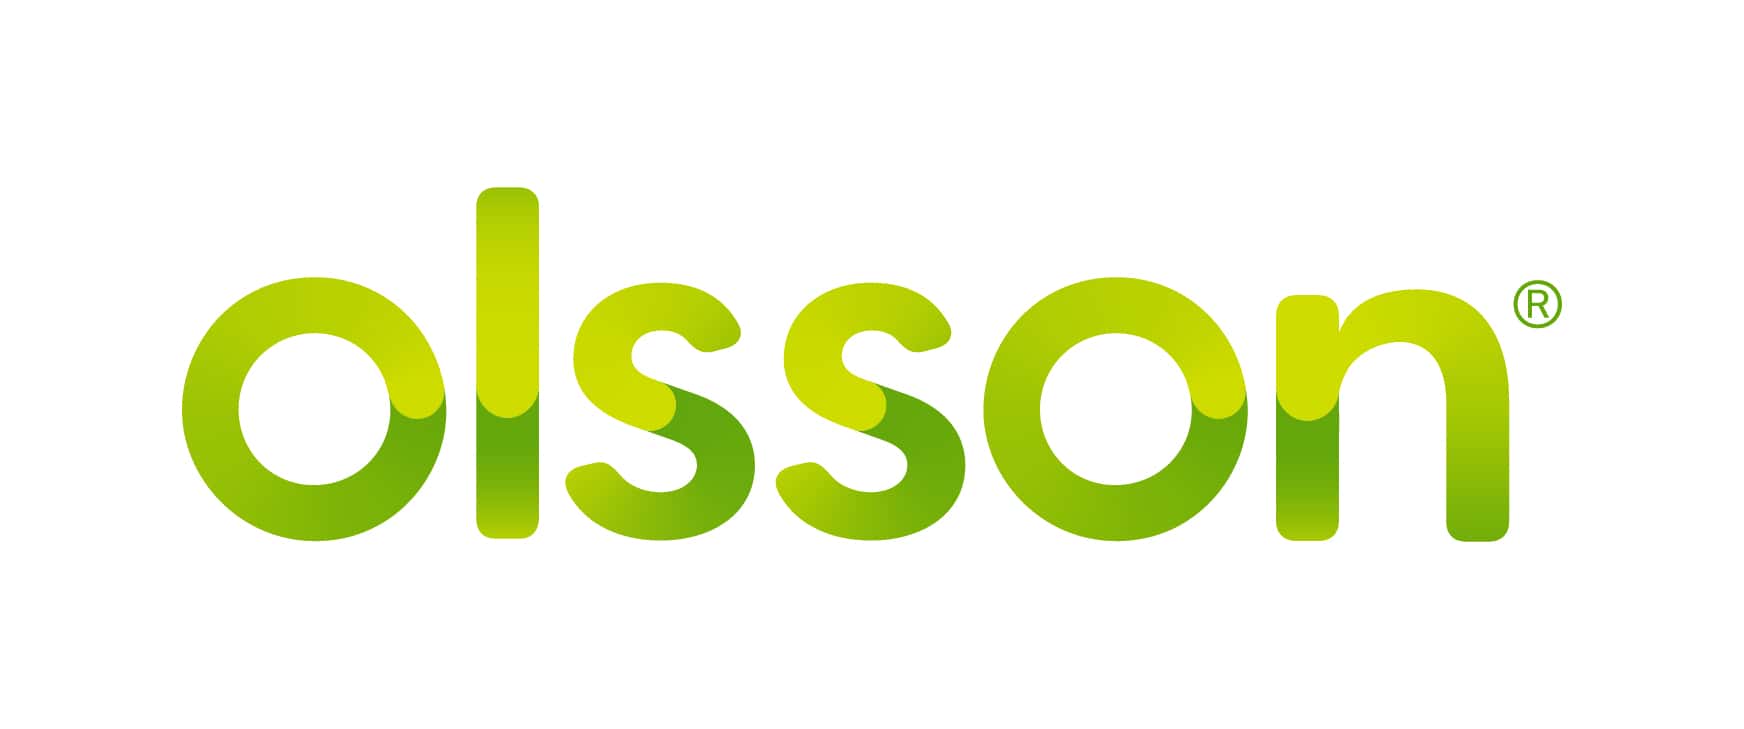 Olsson full color logo in shades of green